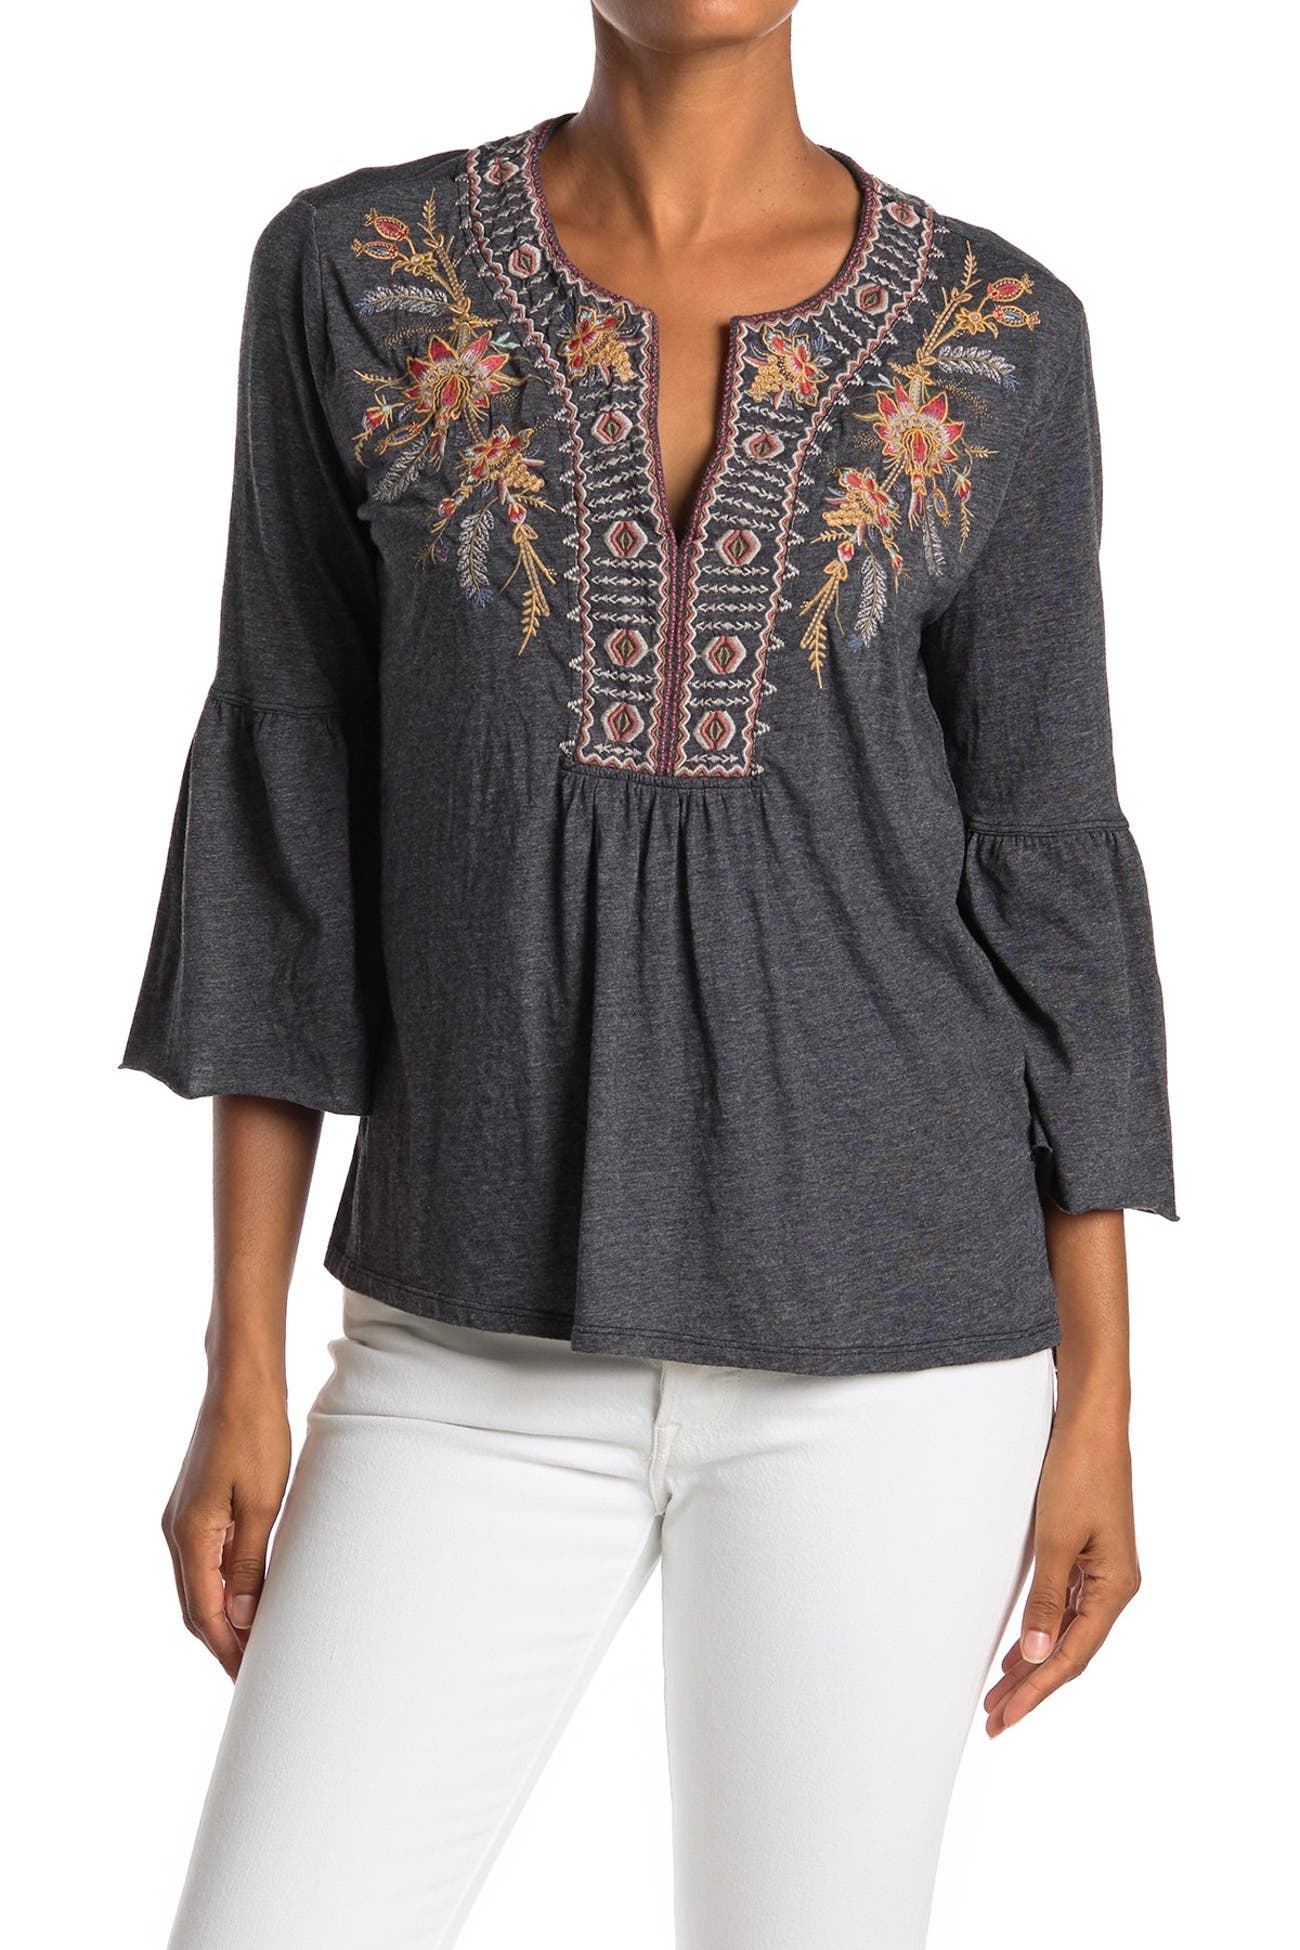 Johnny Was | Hevea Embroidered Bell Sleeve Top | Nordstrom Rack